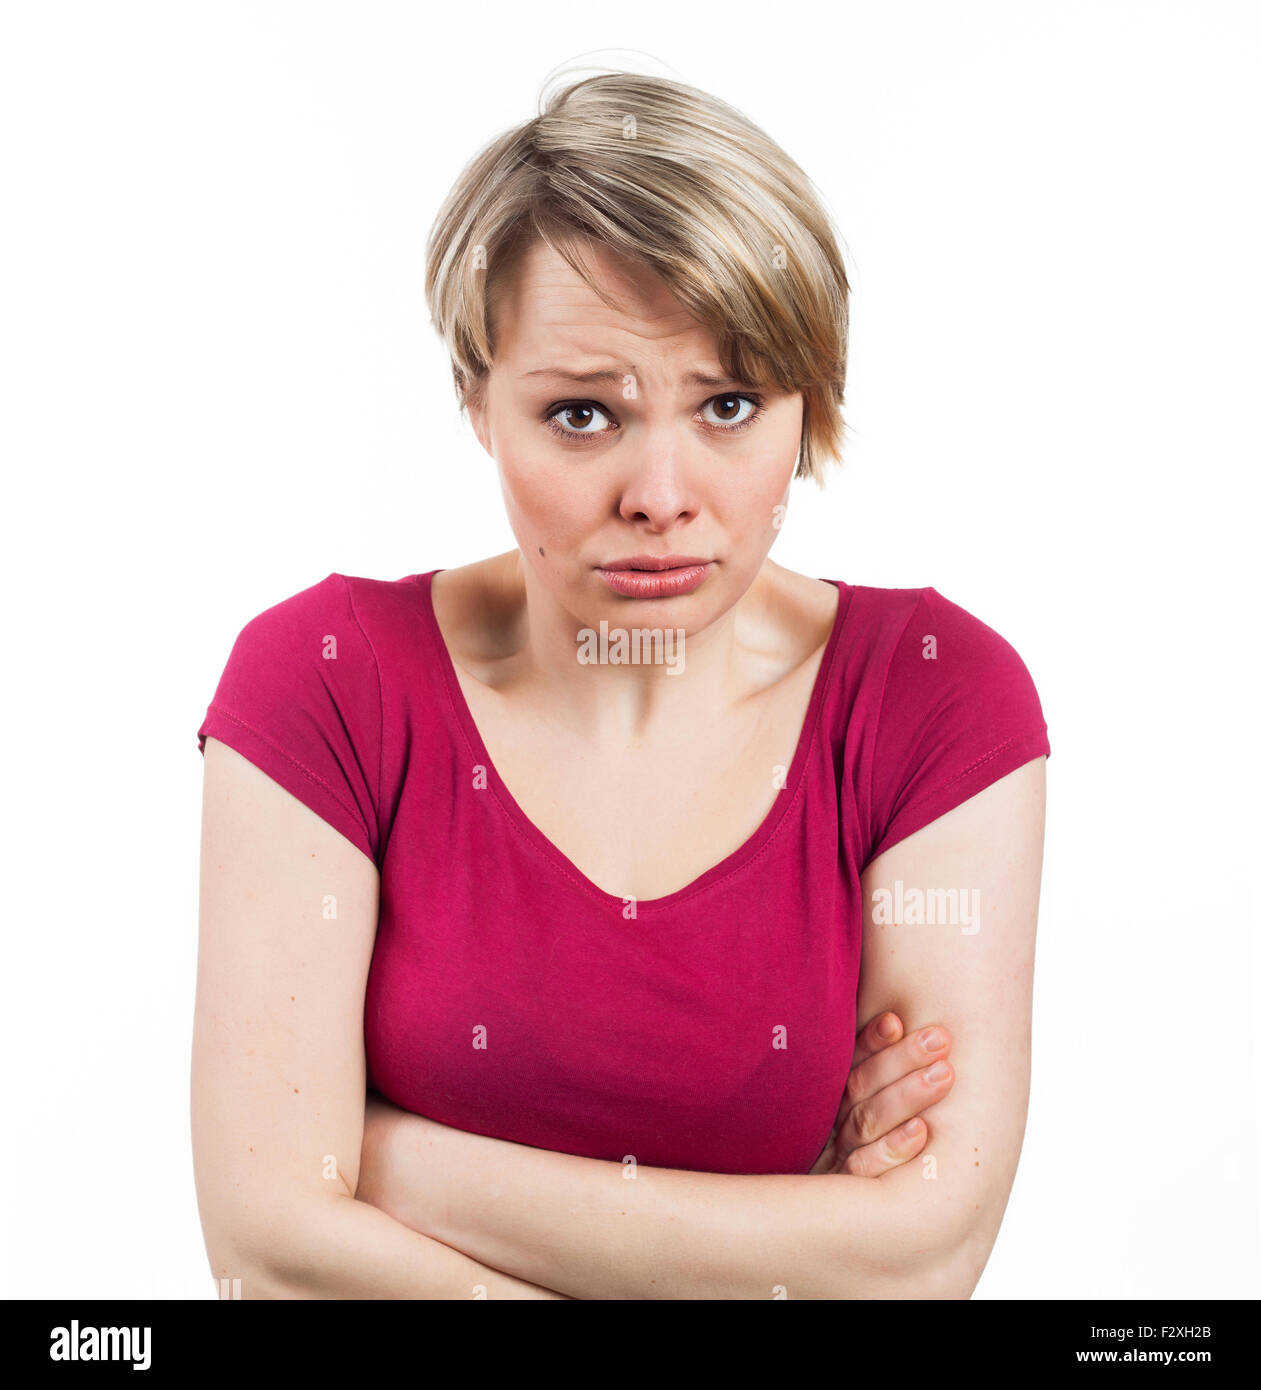 young woman appearing to be in an uncomfortable attitude, isolated on white Stock Photo